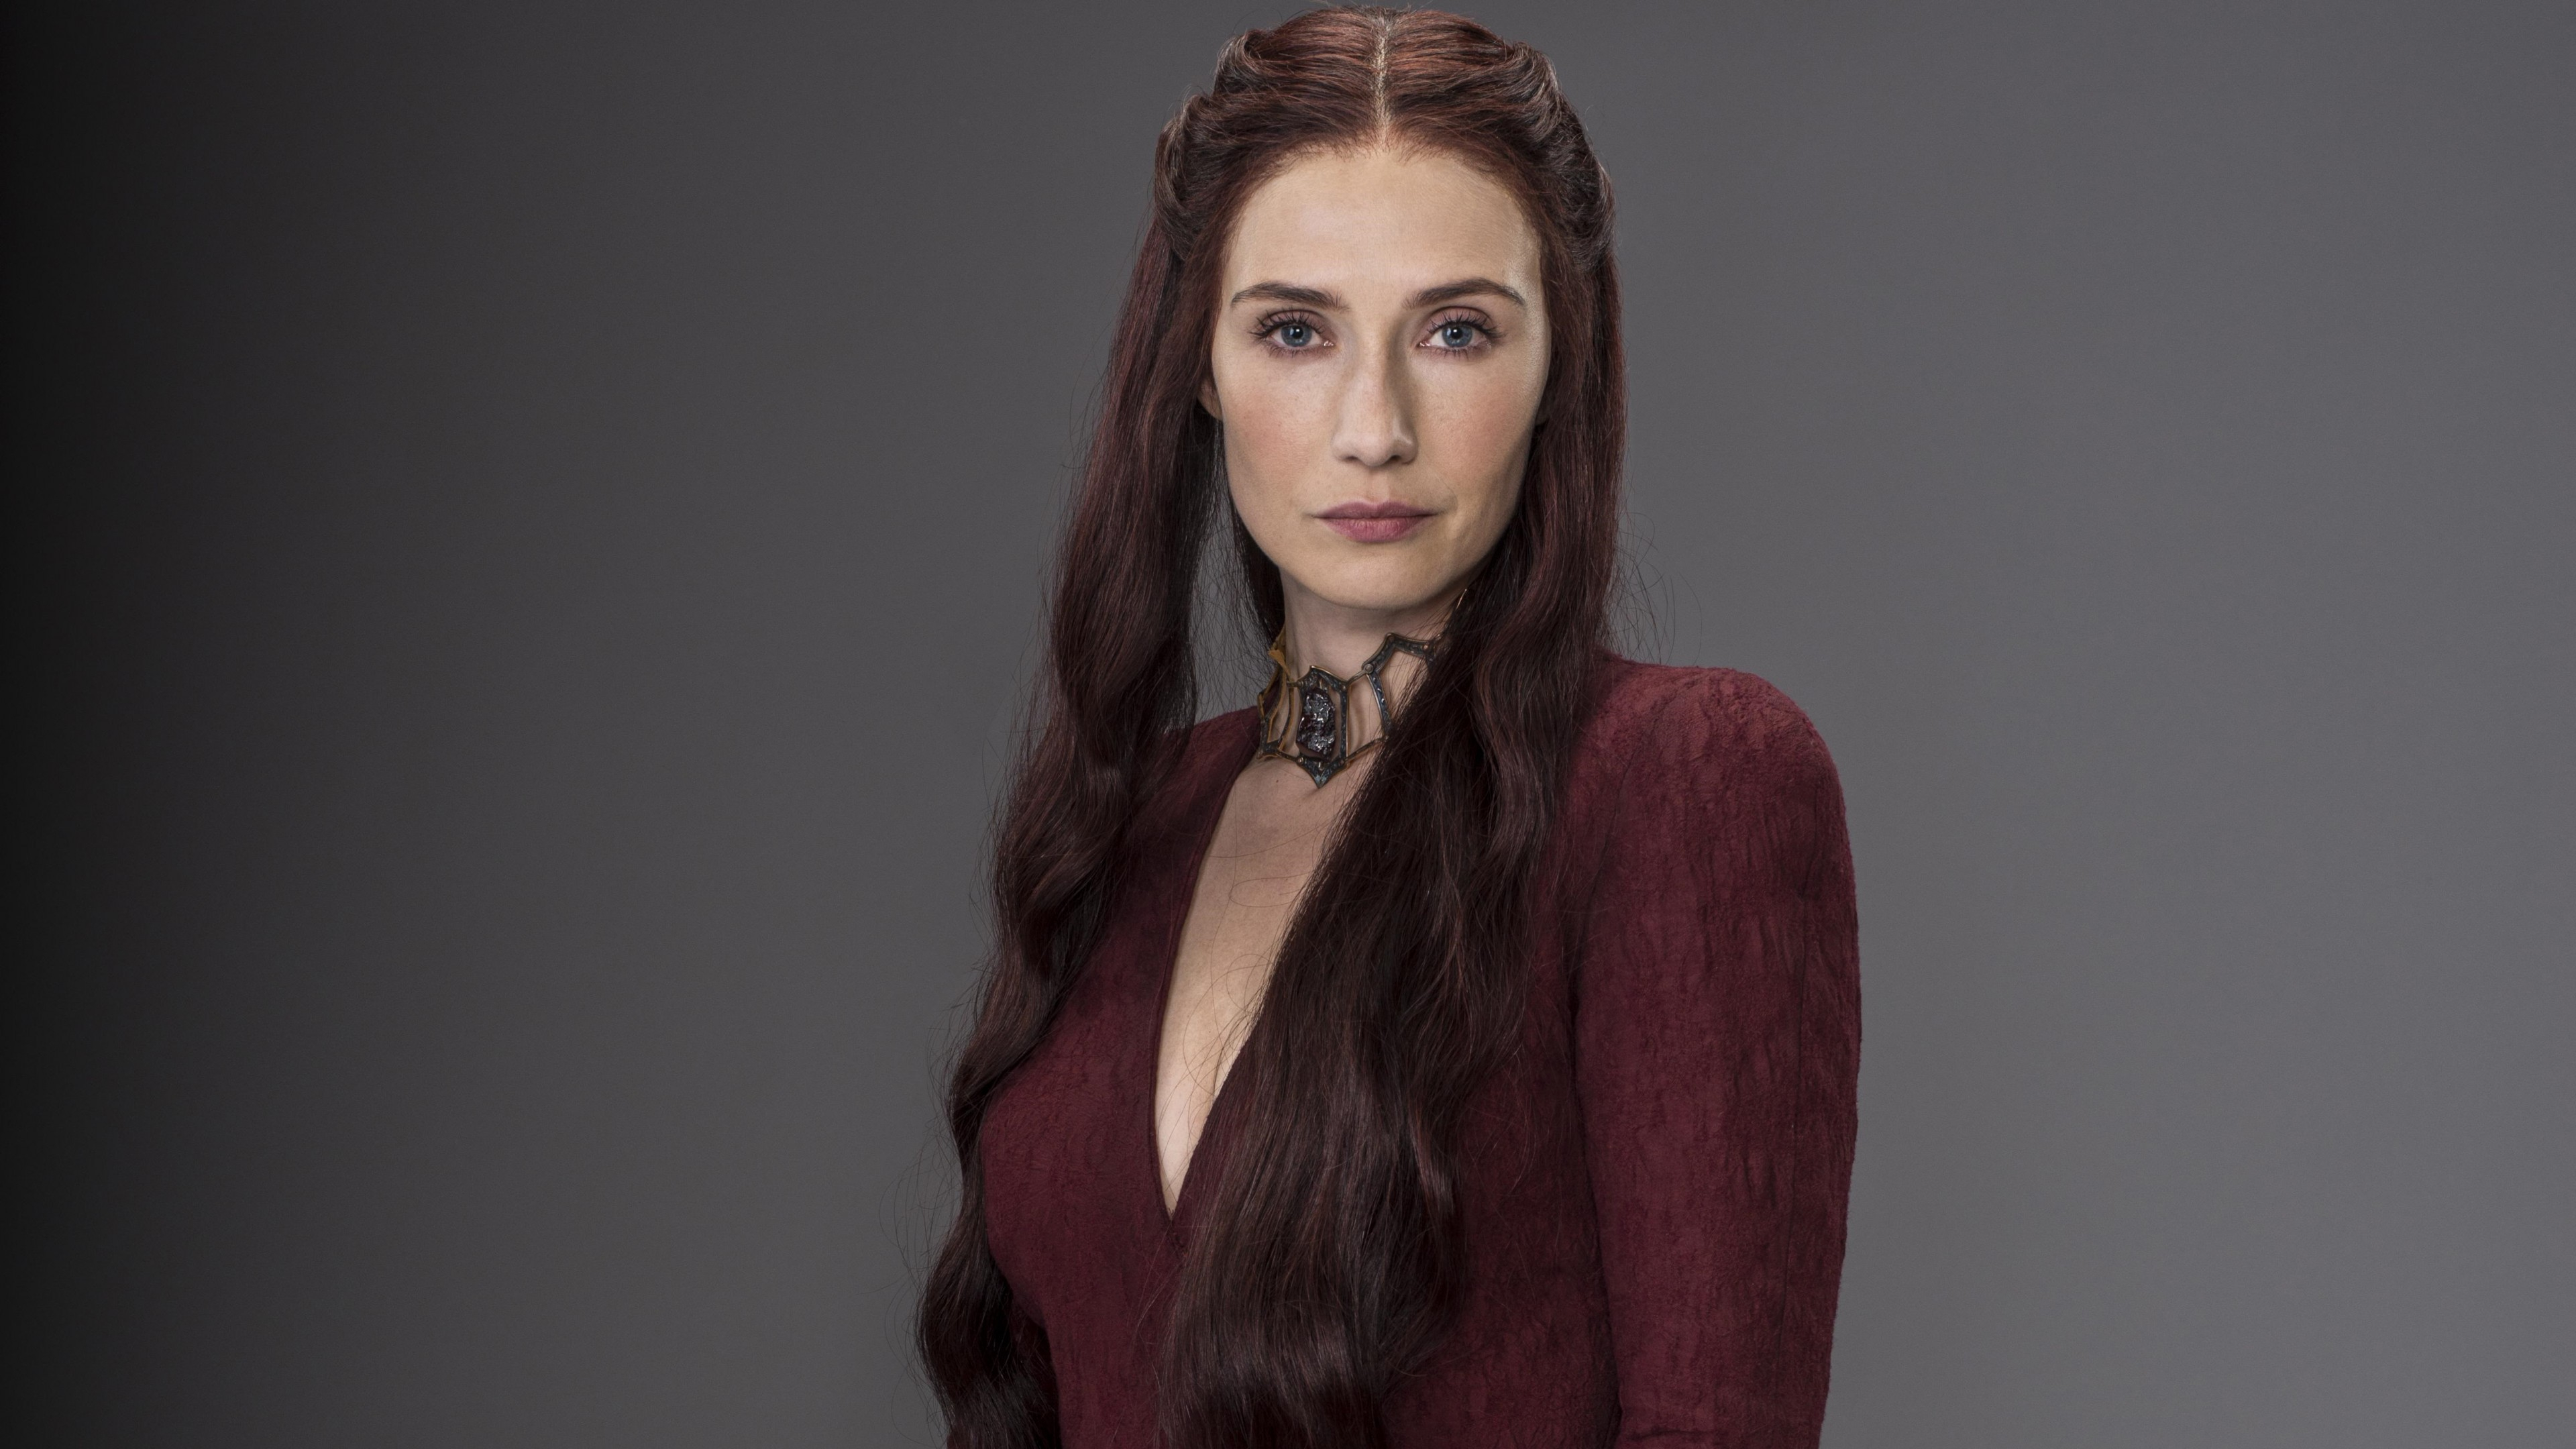 This “Game of Thrones” Quiz Will Reveal If You Can Actually Win the Iron Throne melisandre from Game of thrones